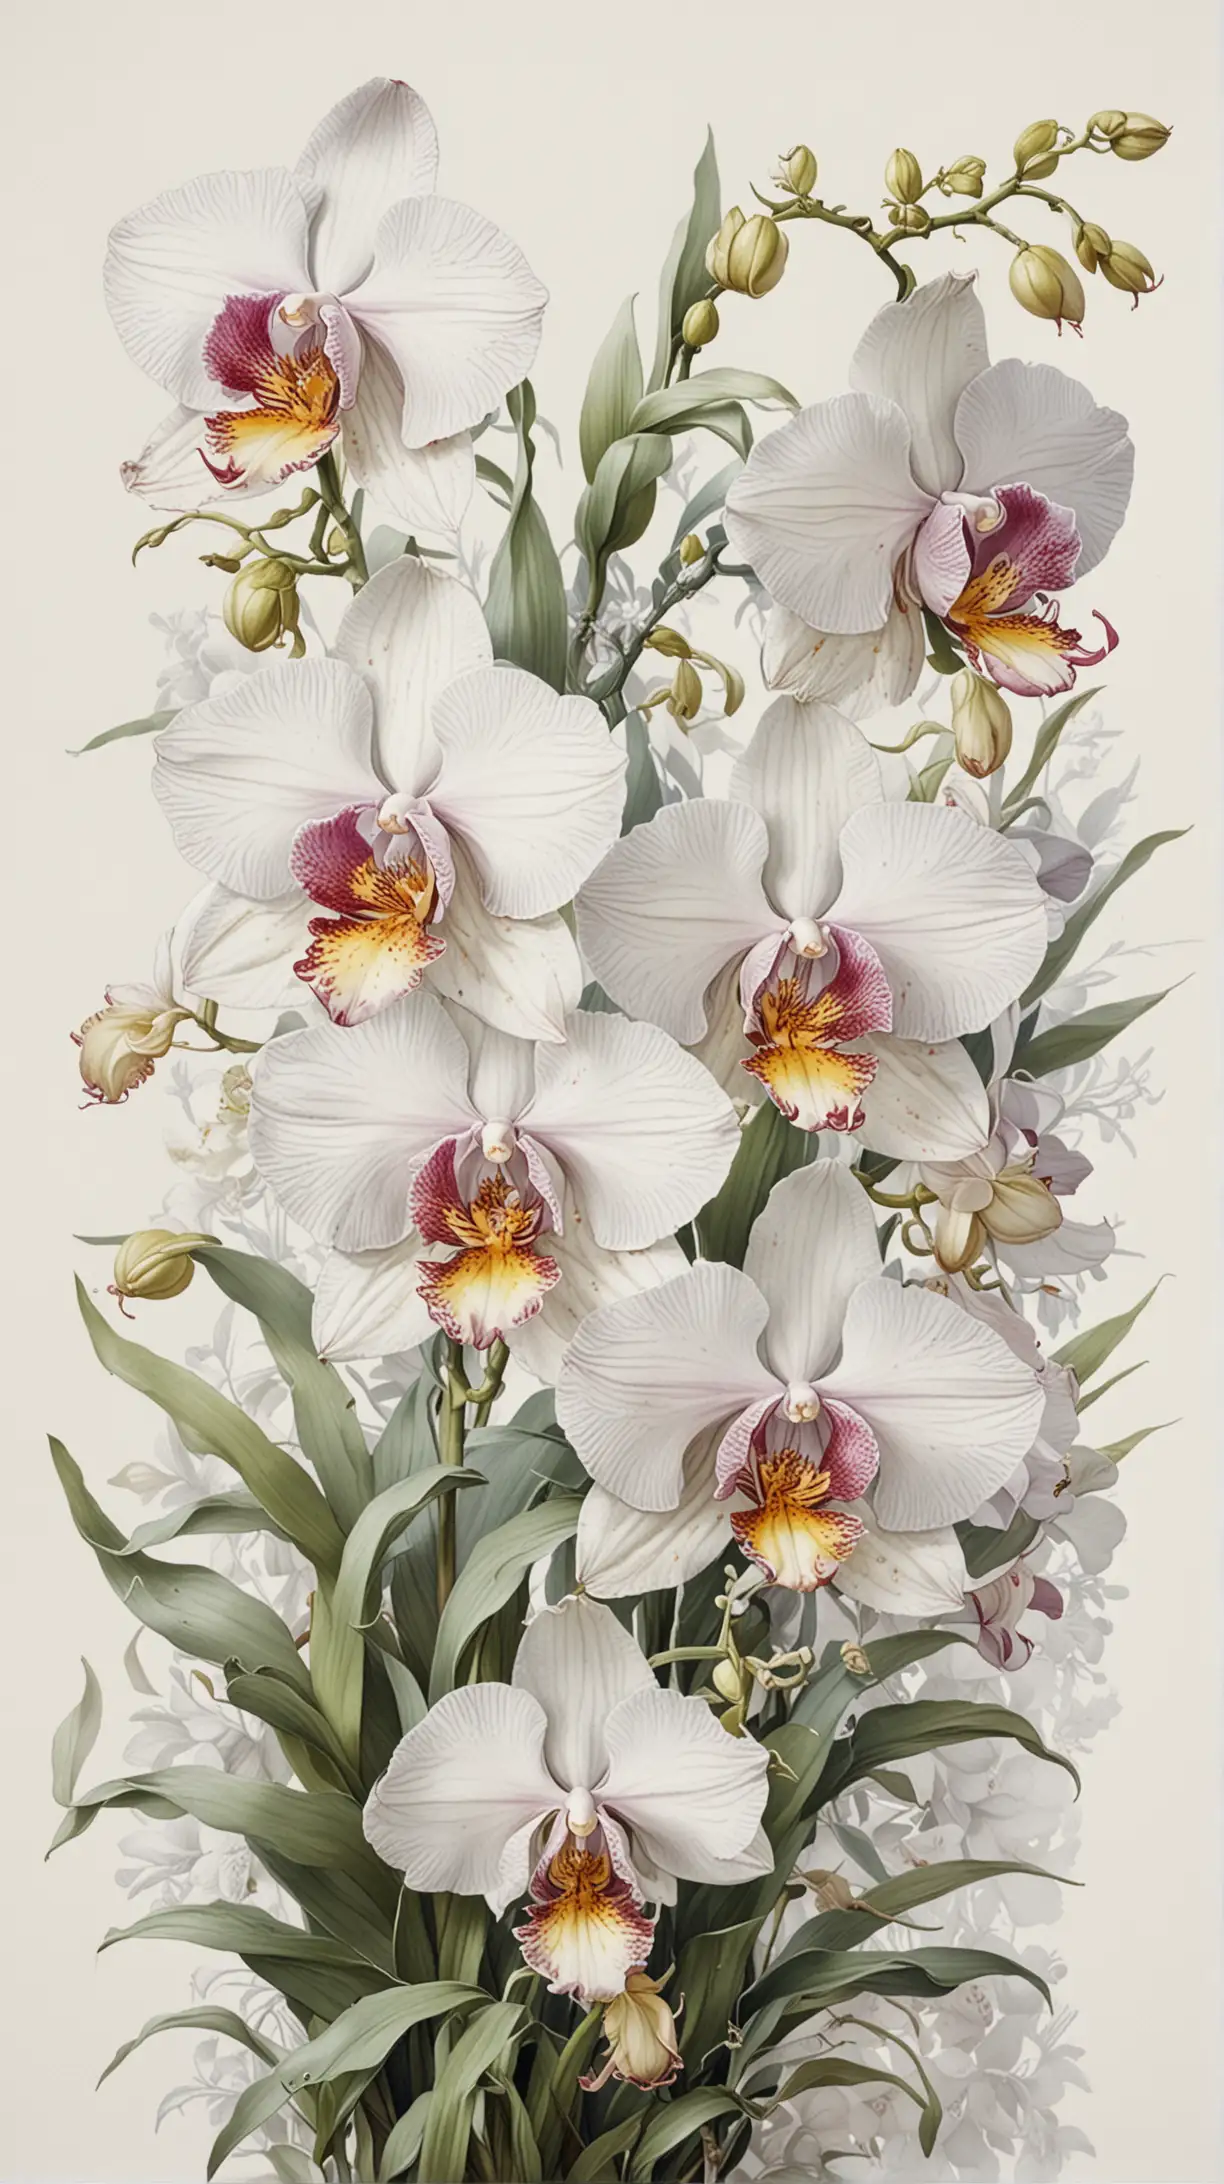 border design, watercolor painting of snow white lush orchids, around the edges  on a solid white background in the style of  Pierre-Joseph Redouté